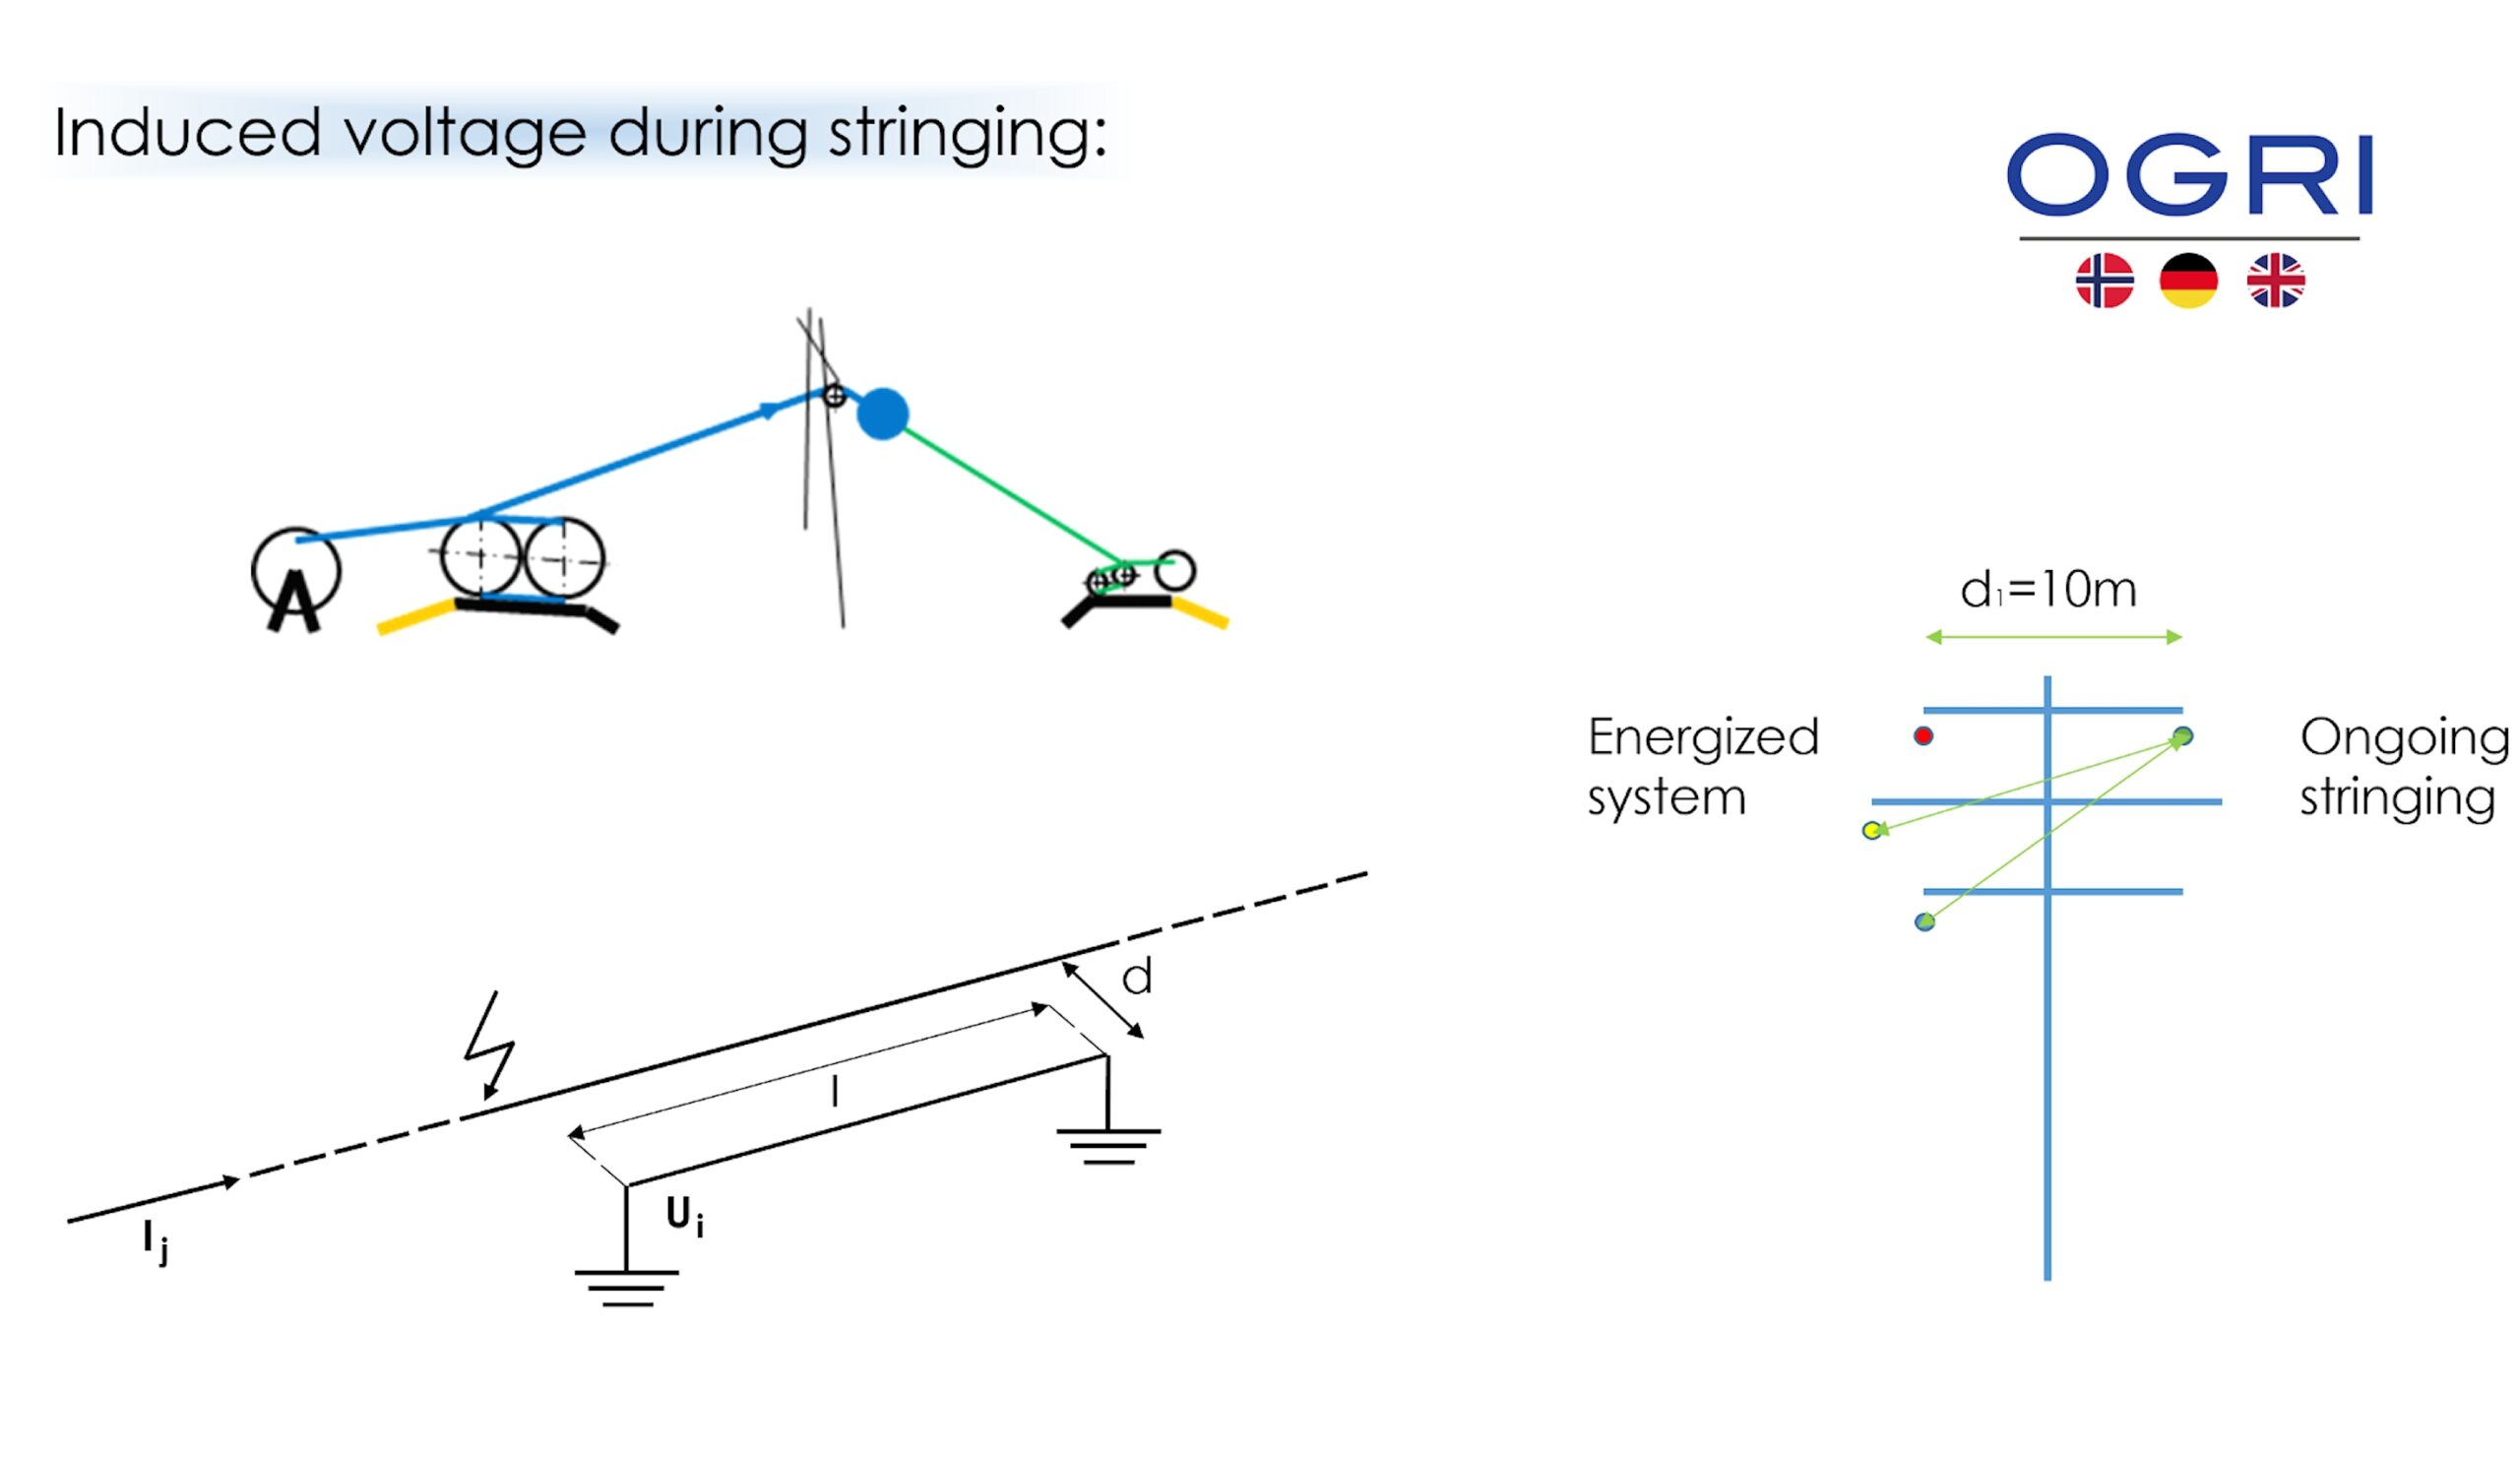 Calculation of induced voltages during stringing